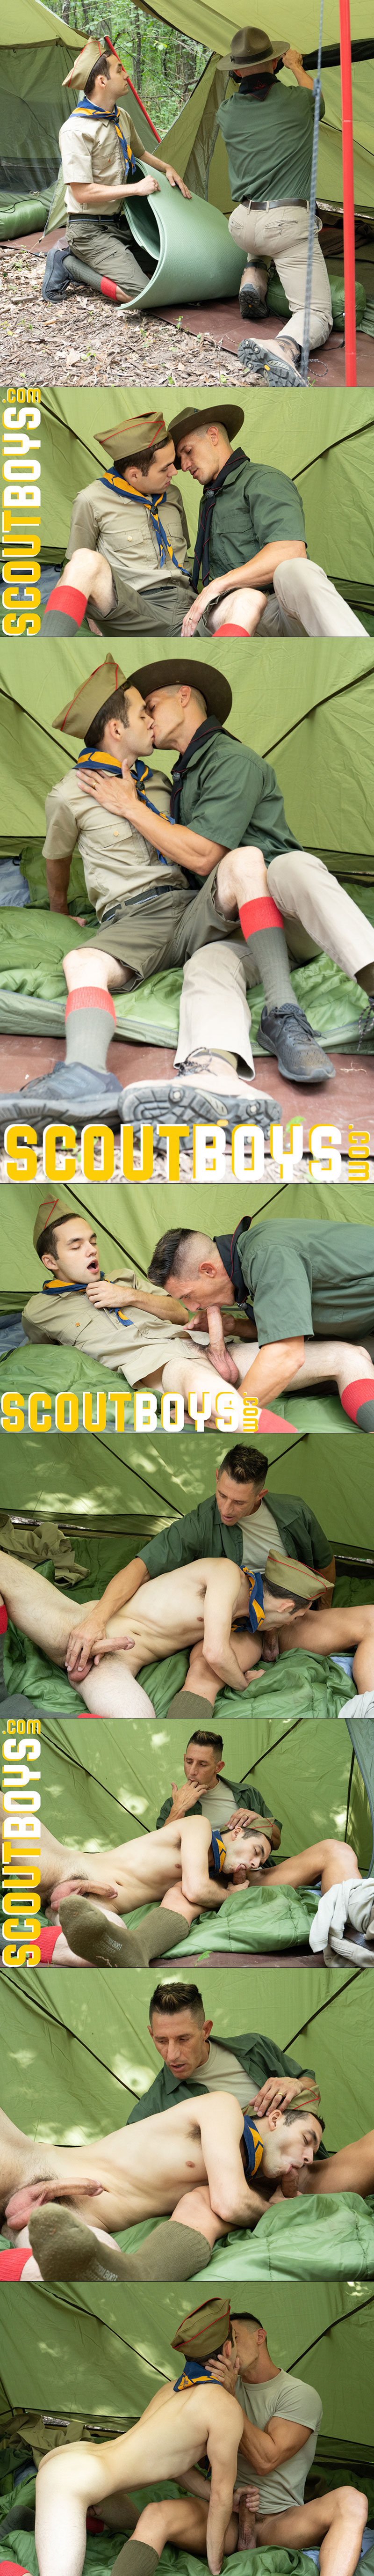 Marcus Rivers Jax Thirio Setting Up Camp ScoutBoys